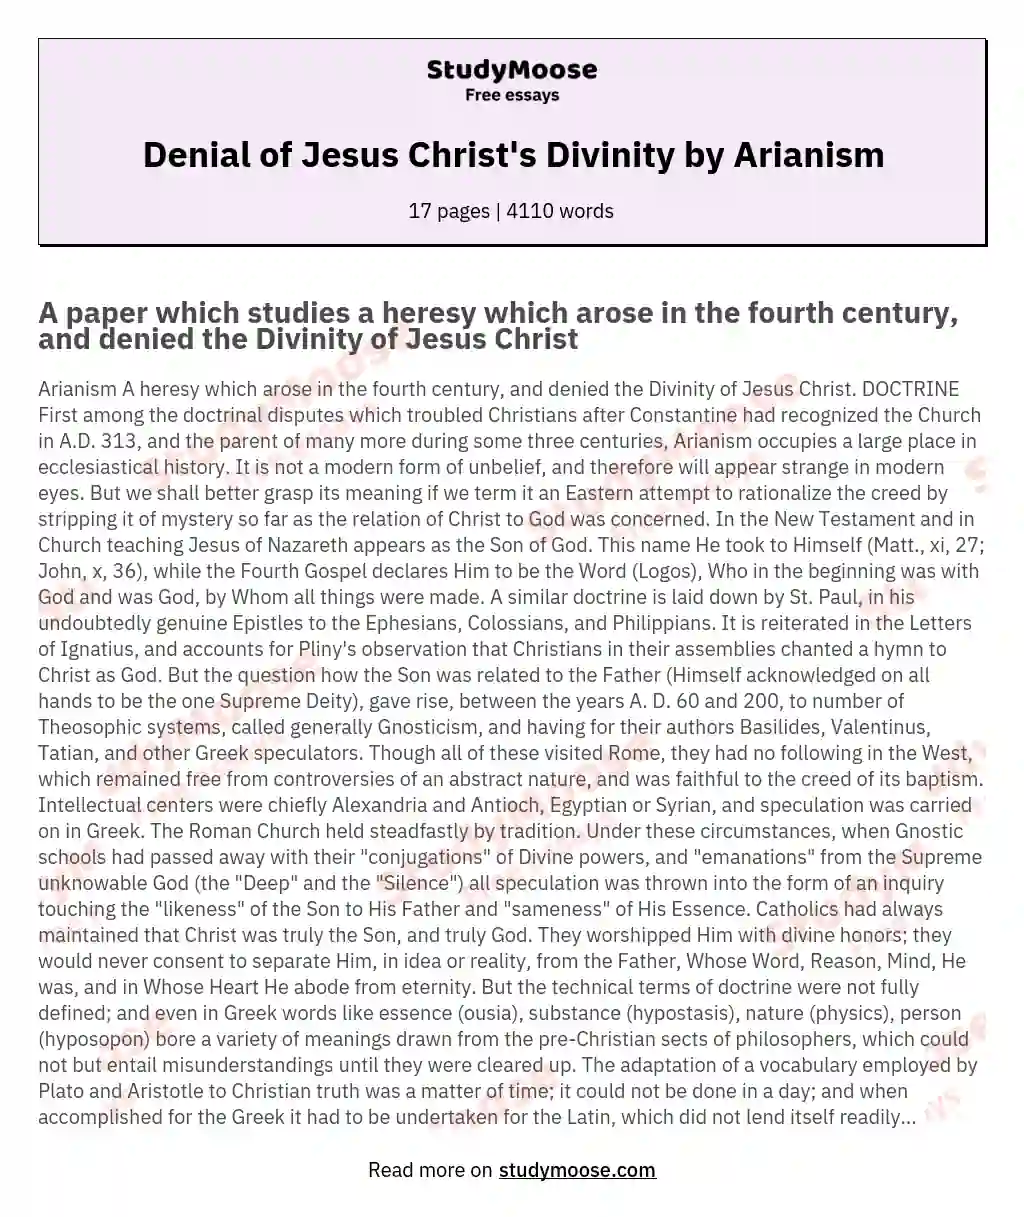 Denial of Jesus Christ's Divinity by Arianism